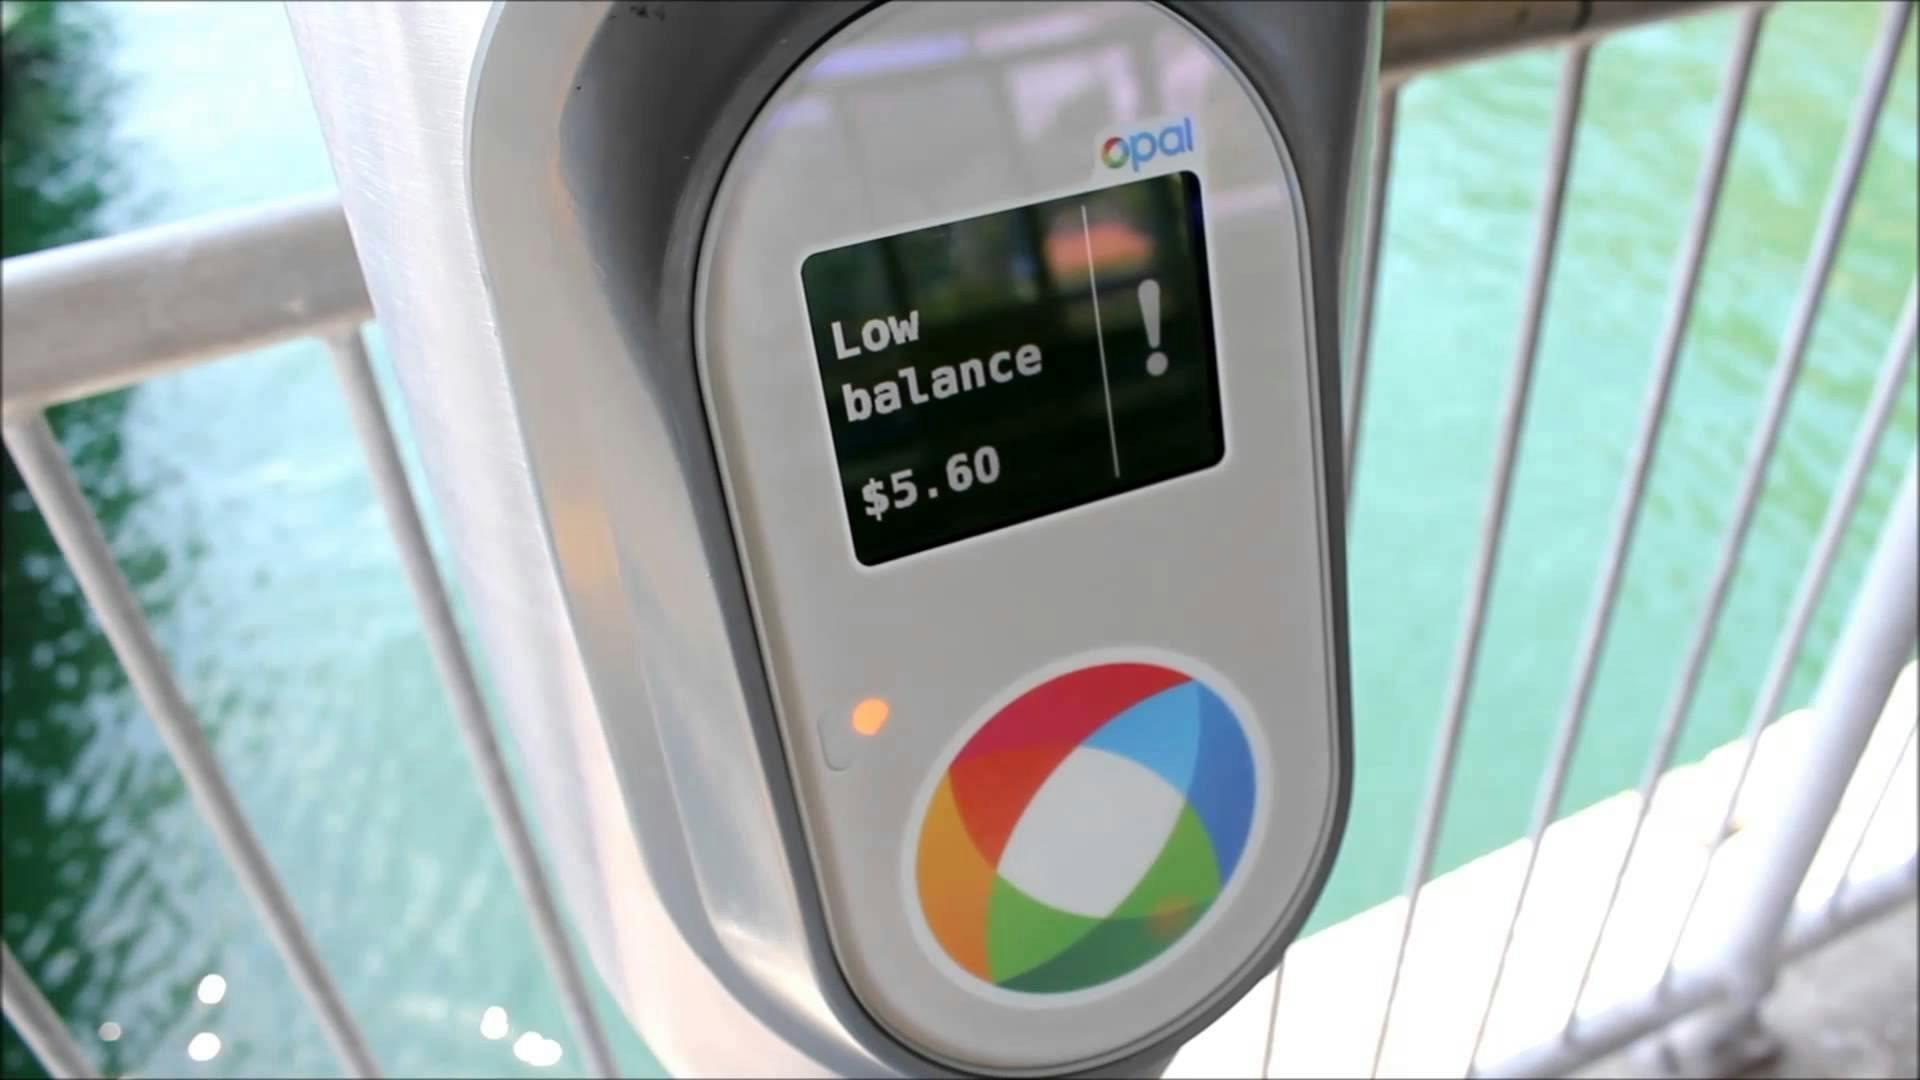 Let’s say goodbye to the Opal card incentives